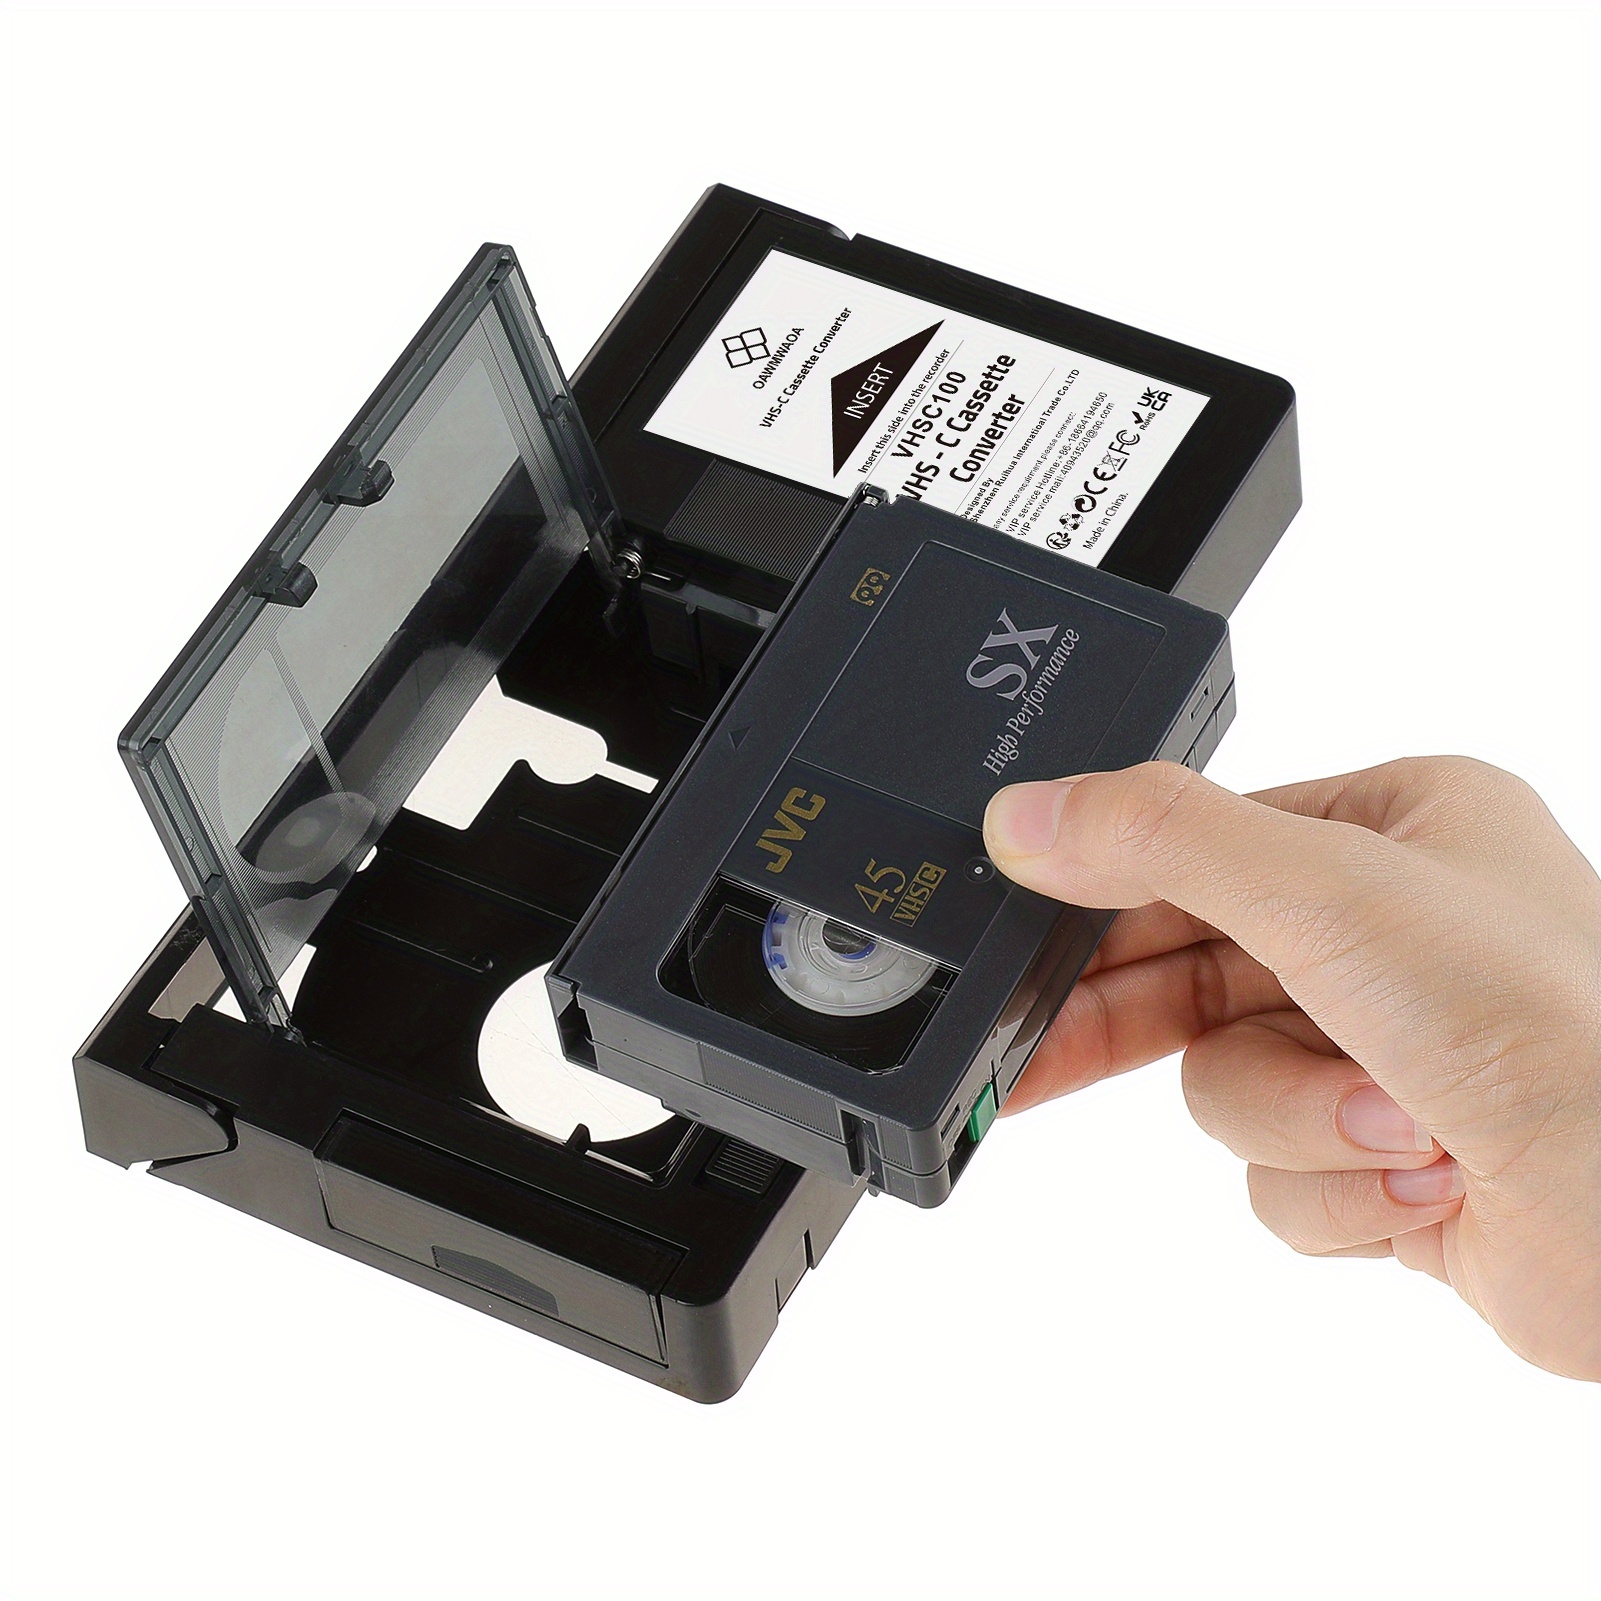 Original Vintage VHS-C Tape Adapter, Convert VHS Tapes To VHS-C Half-size  Video Cassette With This Conversion Box! Not Compatible With 8mm/MiniDV/Hi8